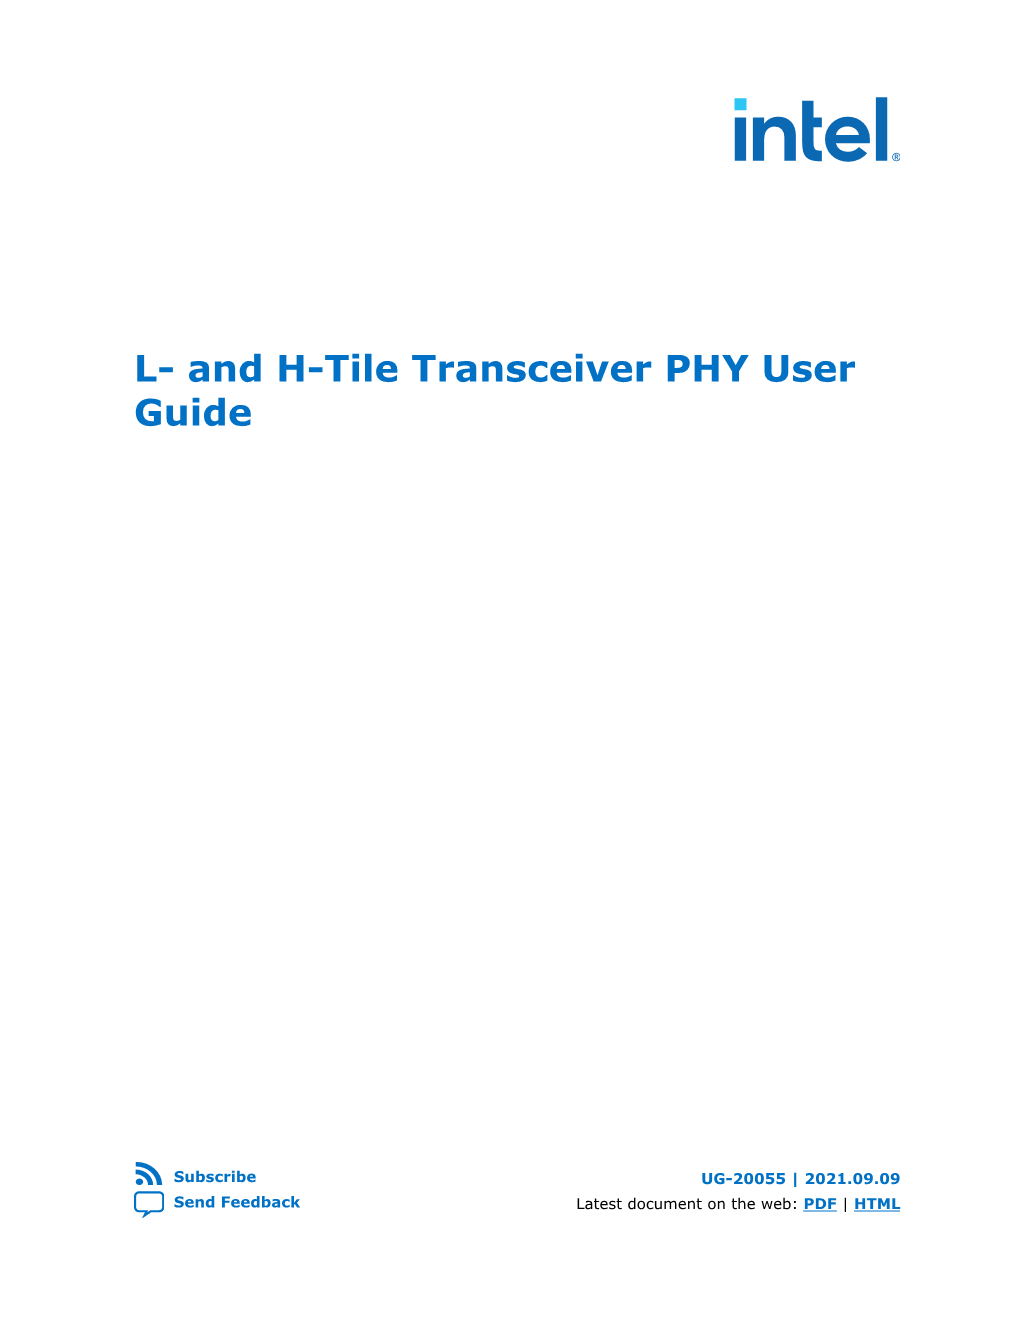 Intel Stratix 10 L- and H-Tile Transceiver PHY User Guide